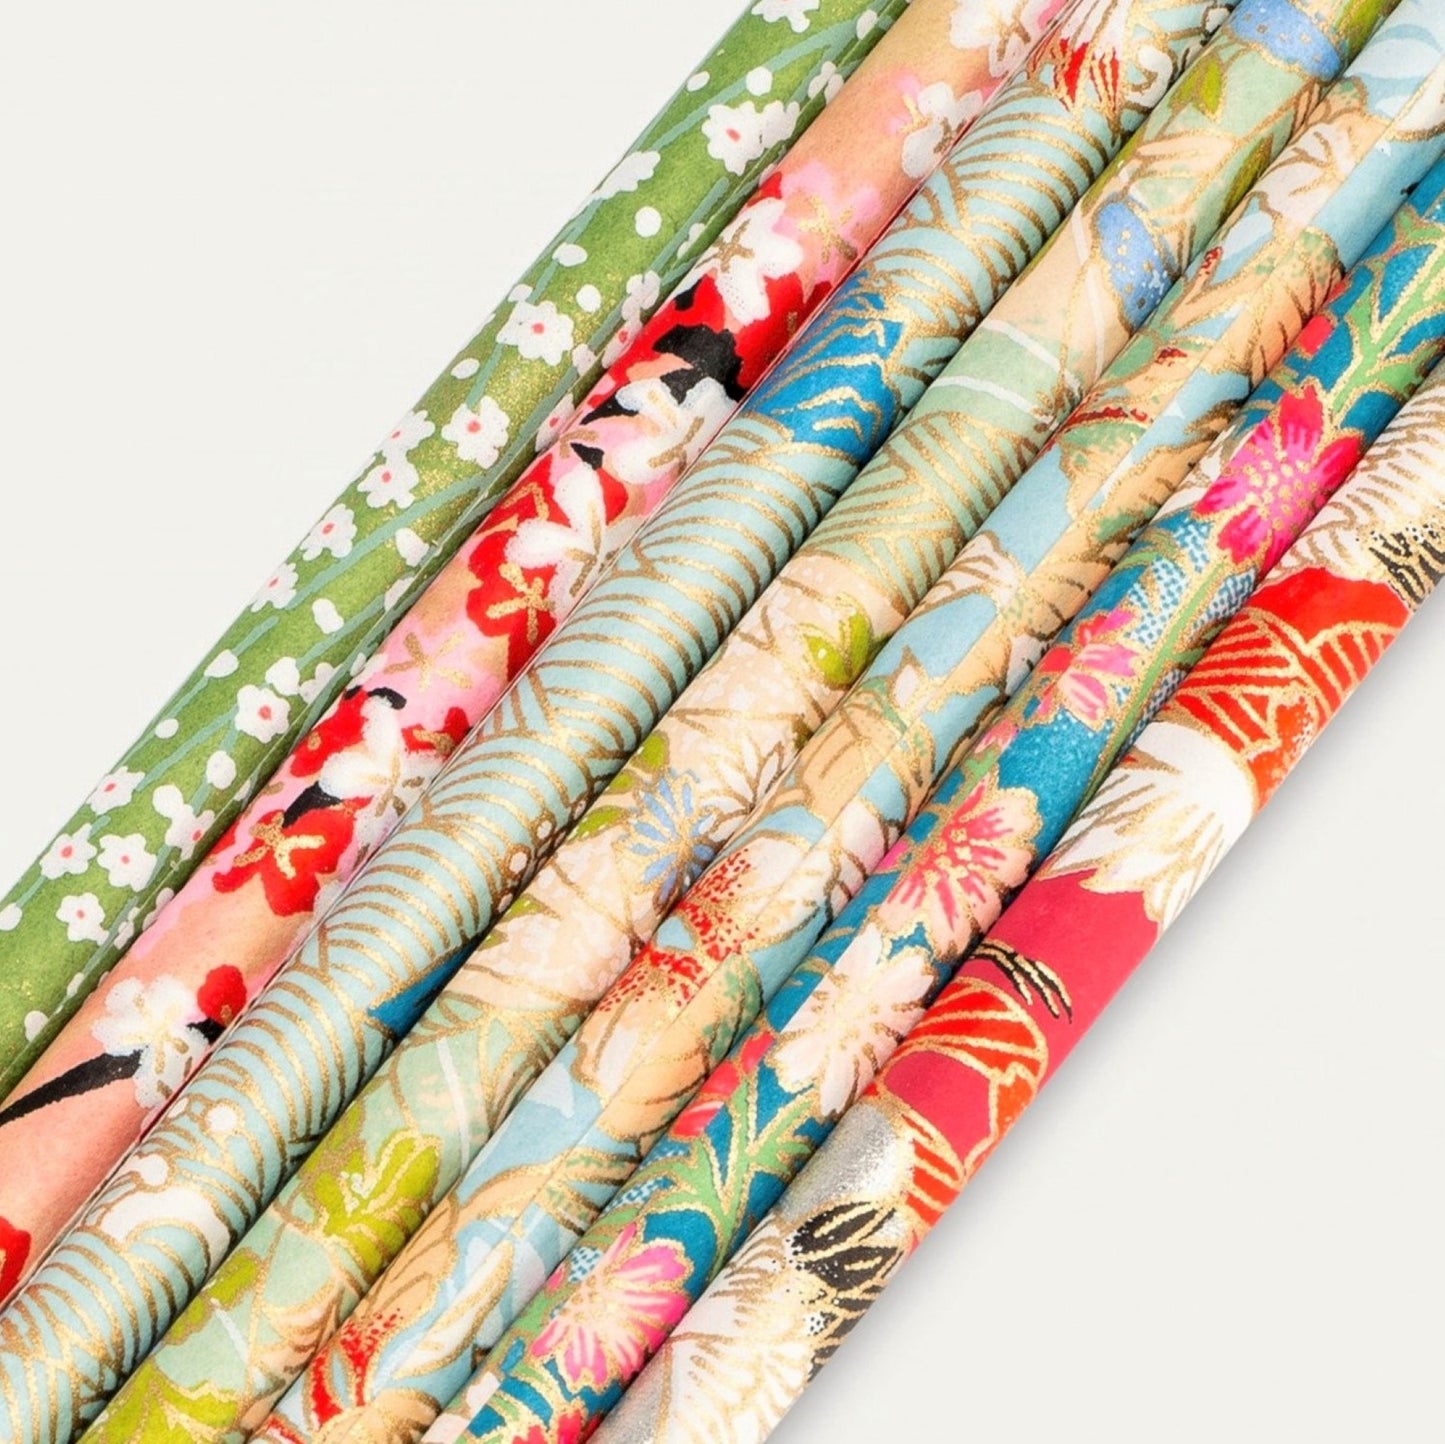 Set of seven pencils covered in assorted japanese silkscreen printed patterned papers , close-up of the patterns